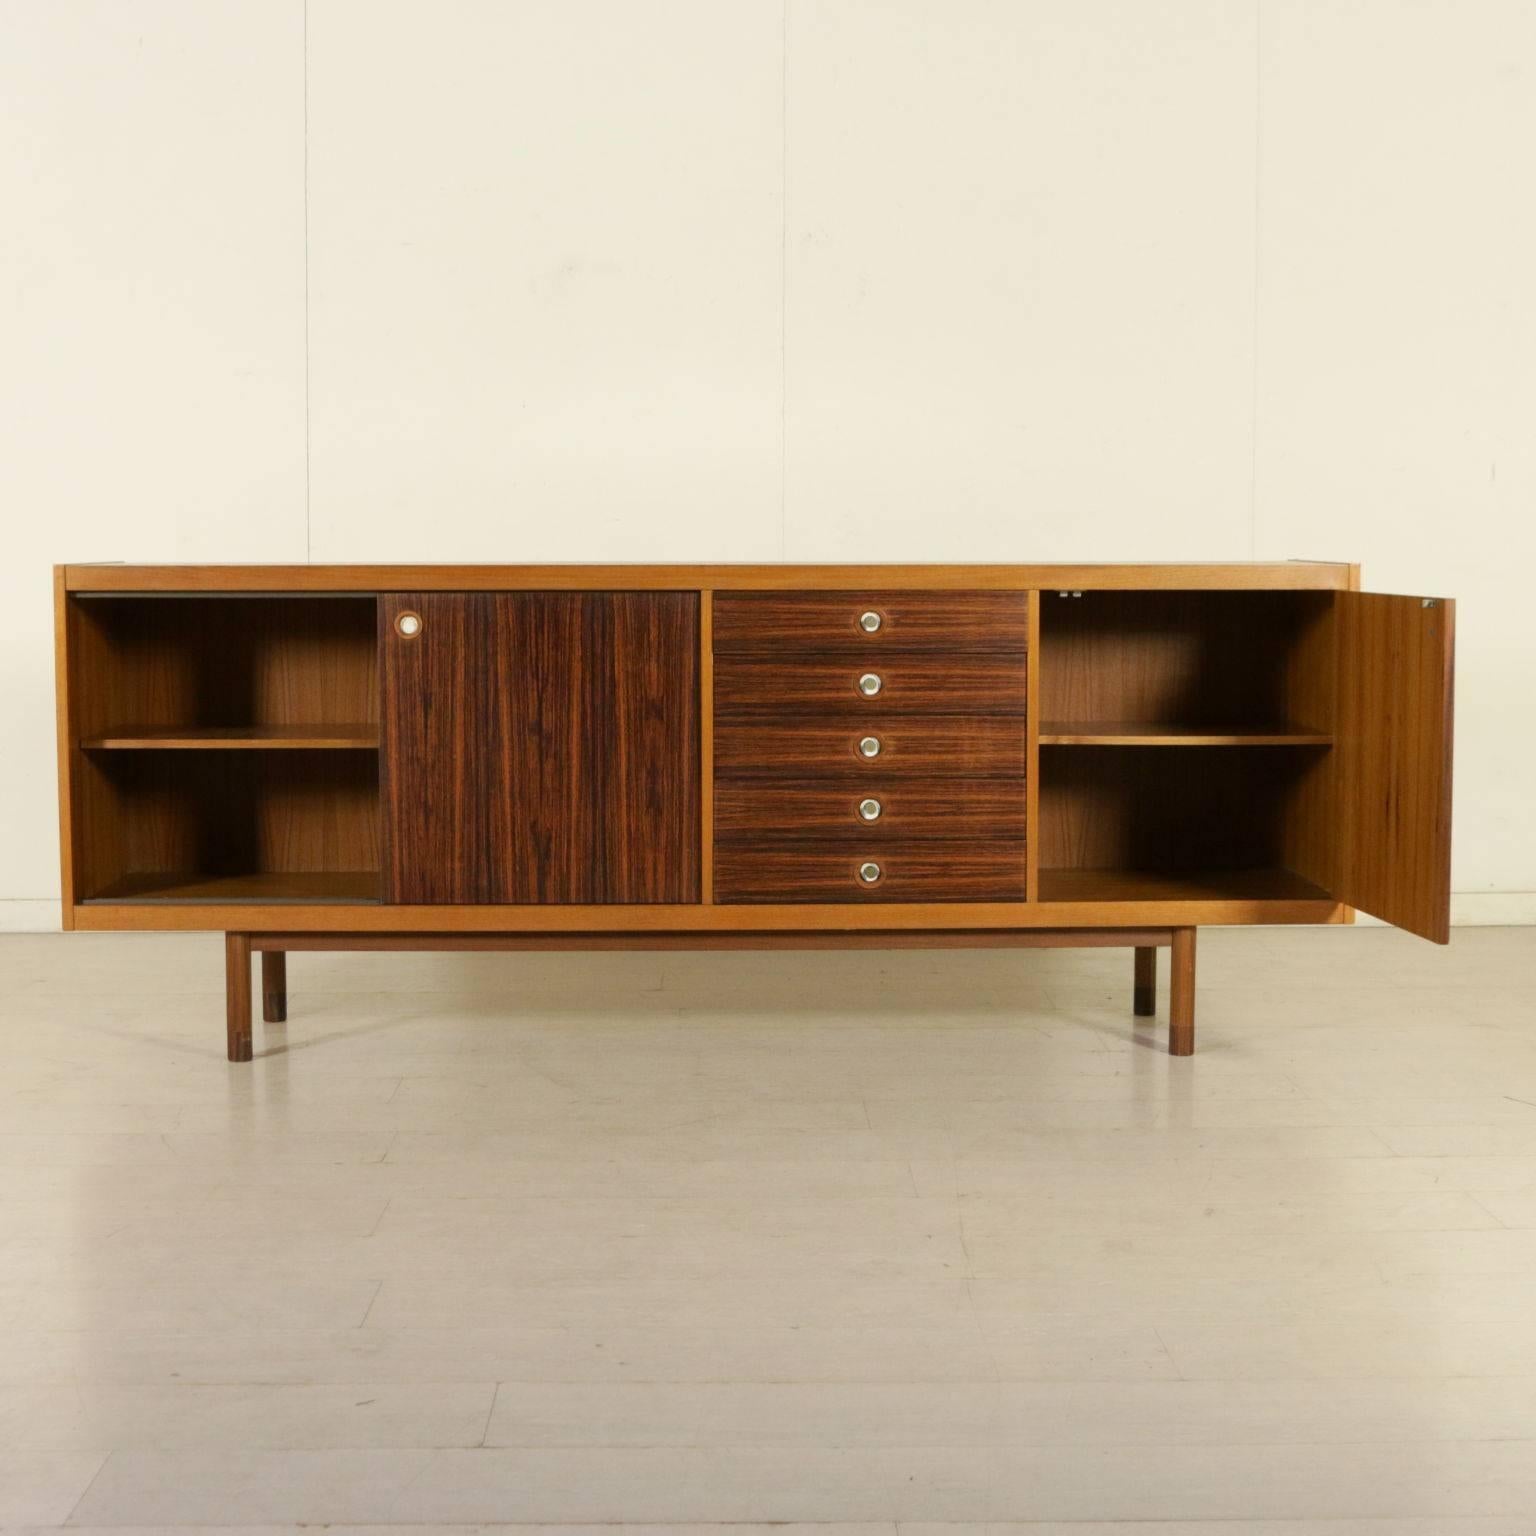 A sideboard with hinged doors, sliding doors and five drawers. Teak and rosewood veneer, brass handles. Manufactured in Italy, 1960s.